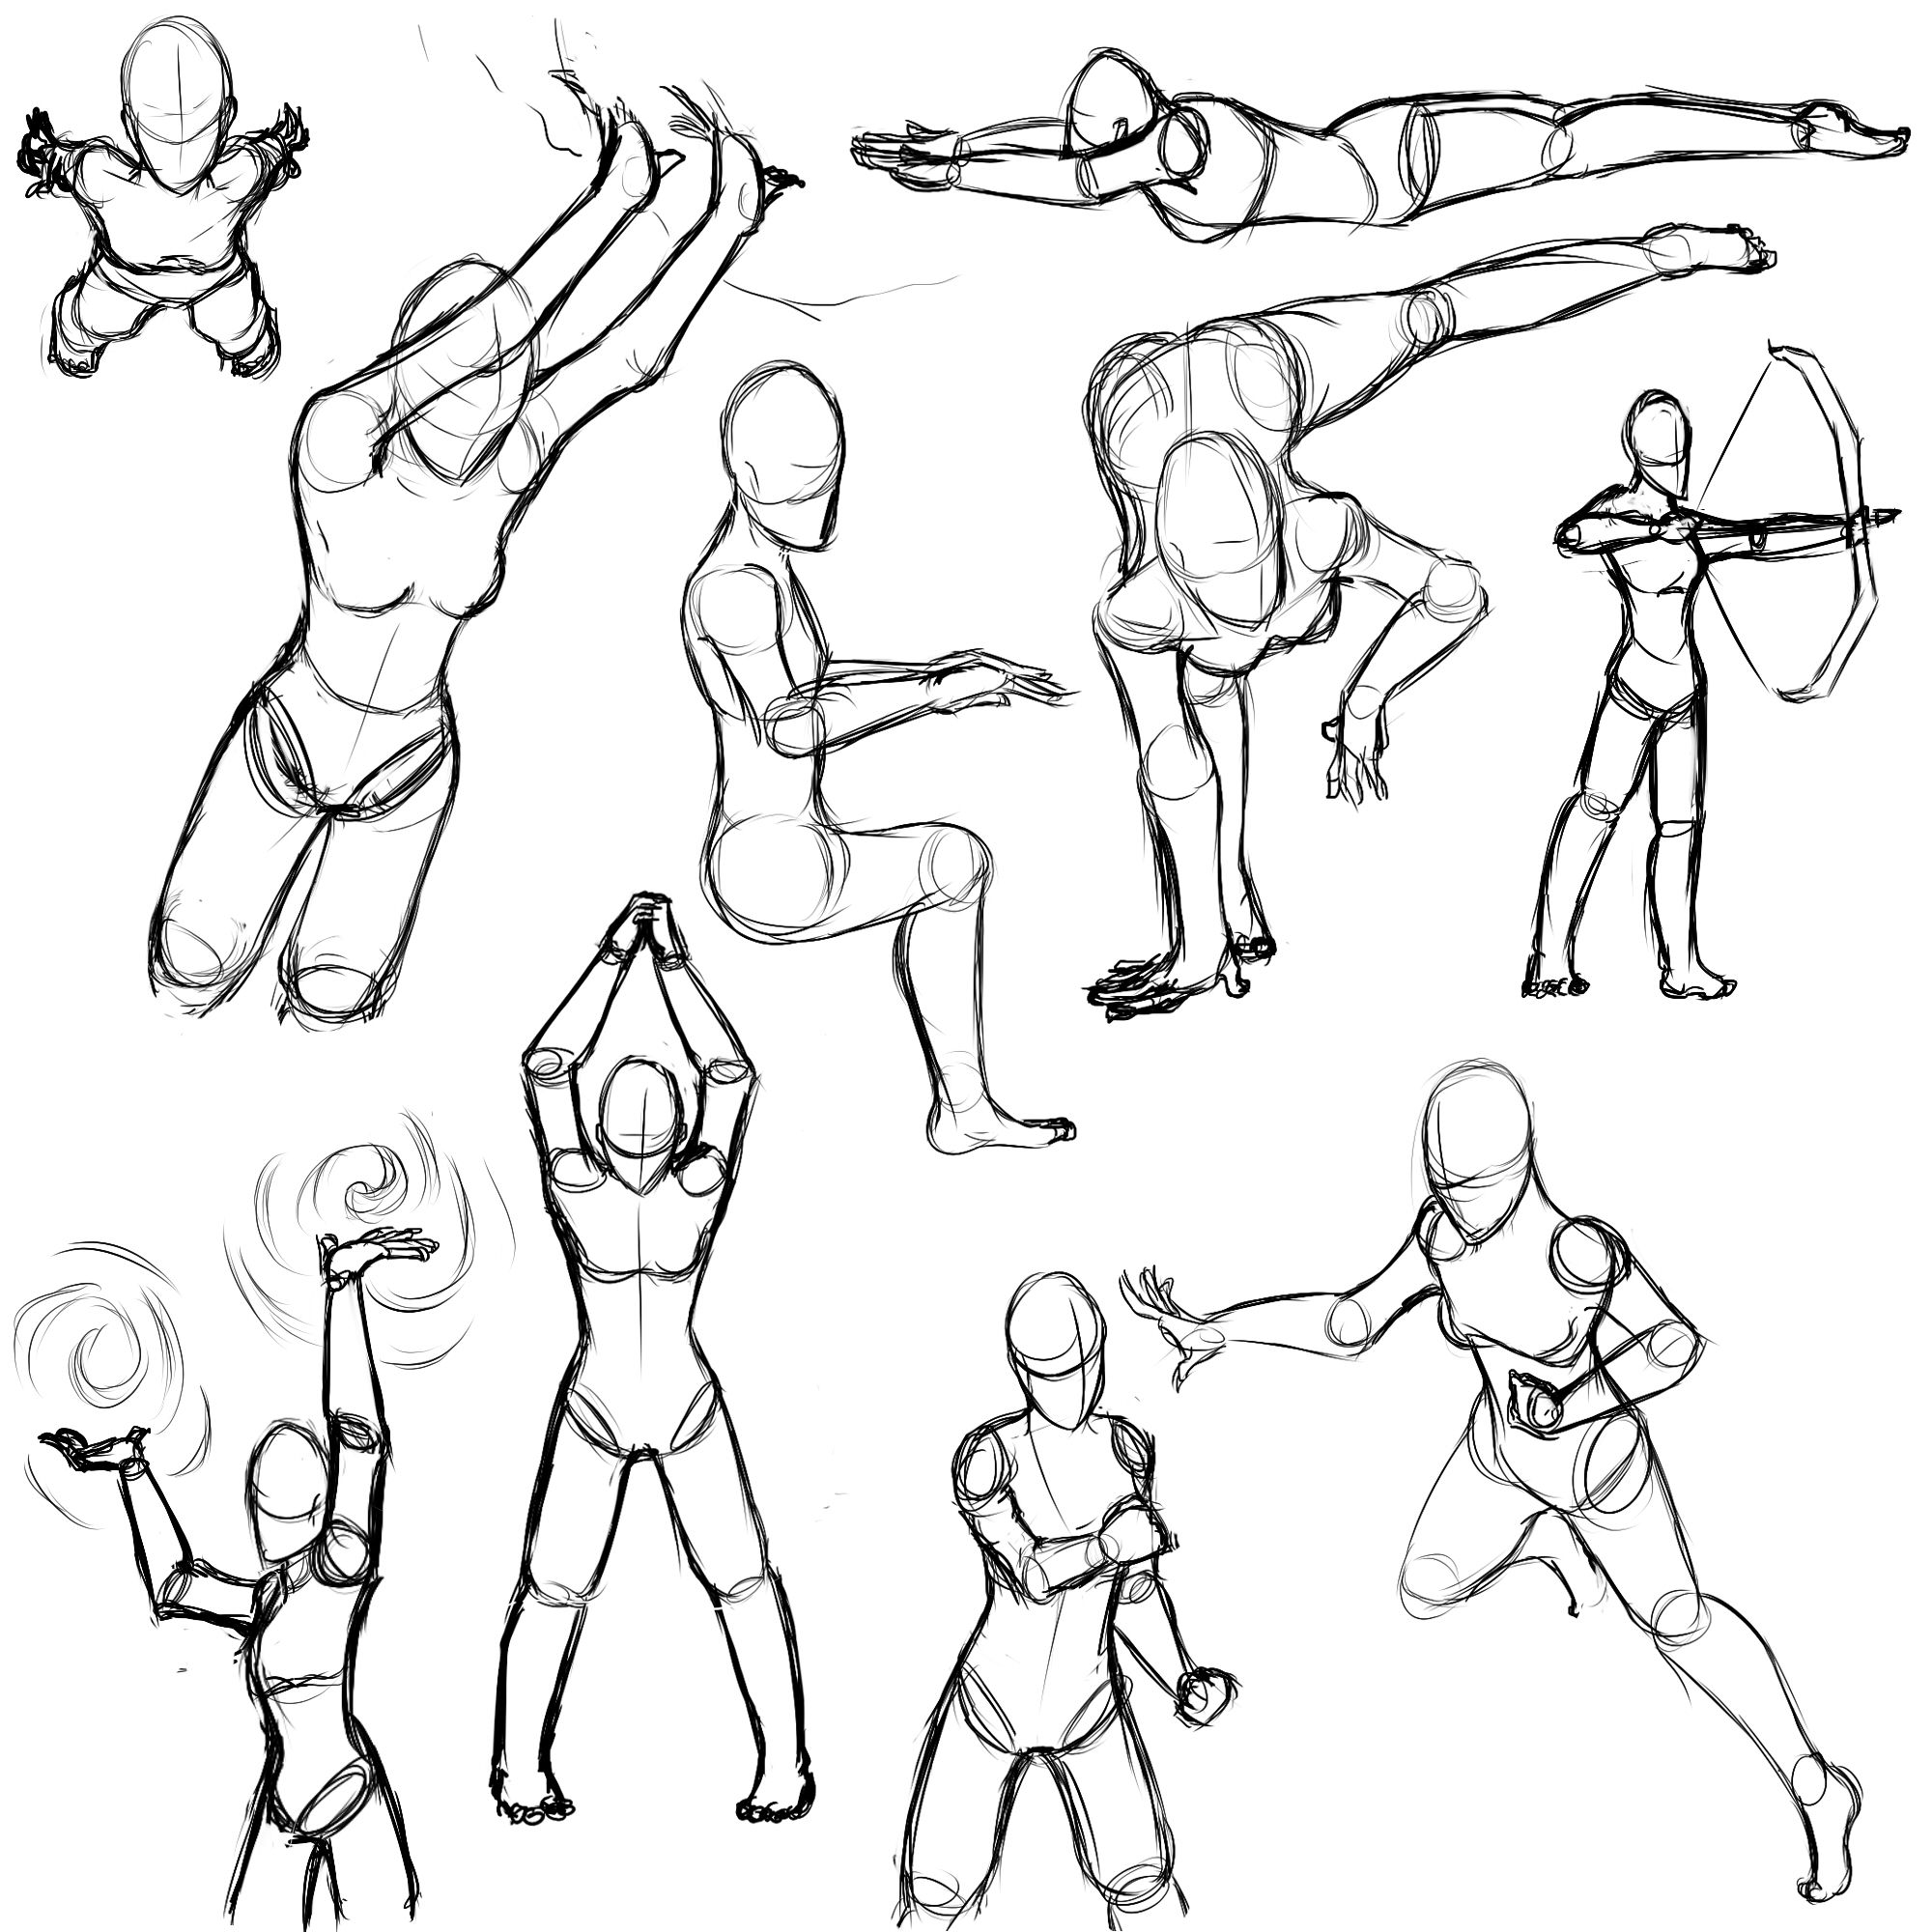 Tried to draw some dynamic poses from imagination : r/DigitalArt